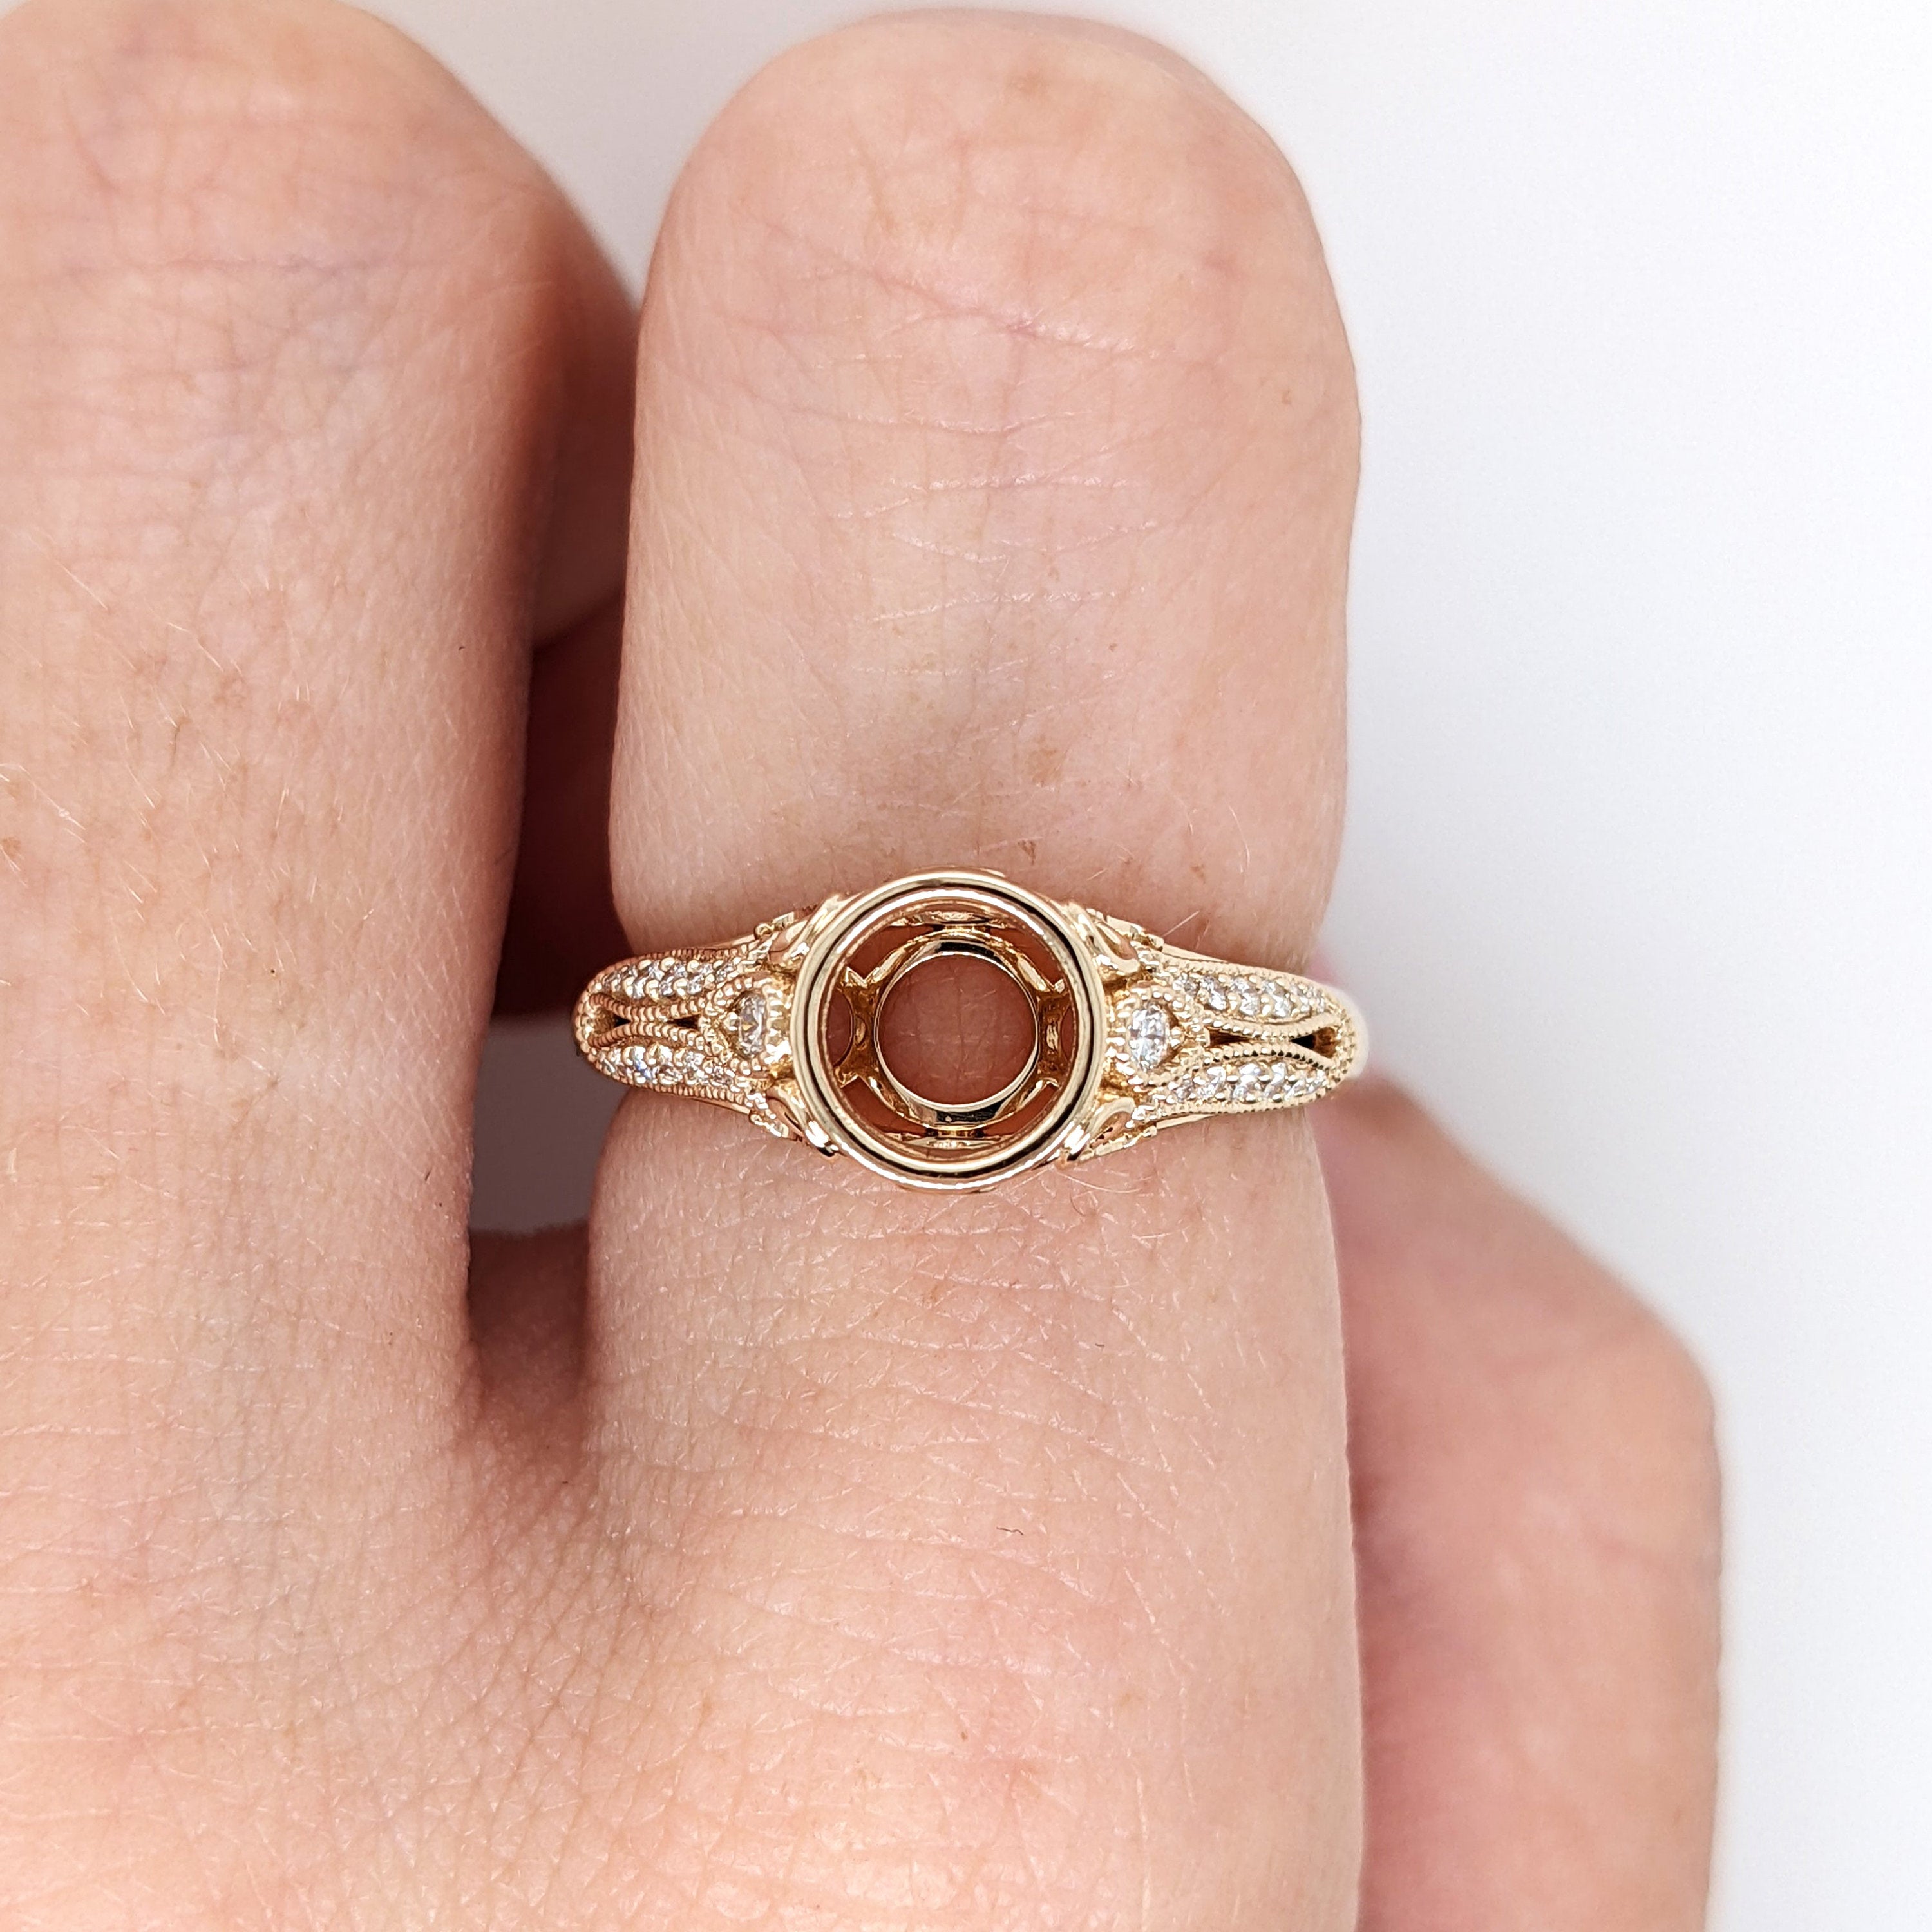 Detailed Vintage Style Ring Semi Mount in Solid 14k White, Yellow or Rose Gold w Round Diamond Accents | Round Bezel Setting | Custom Sizes